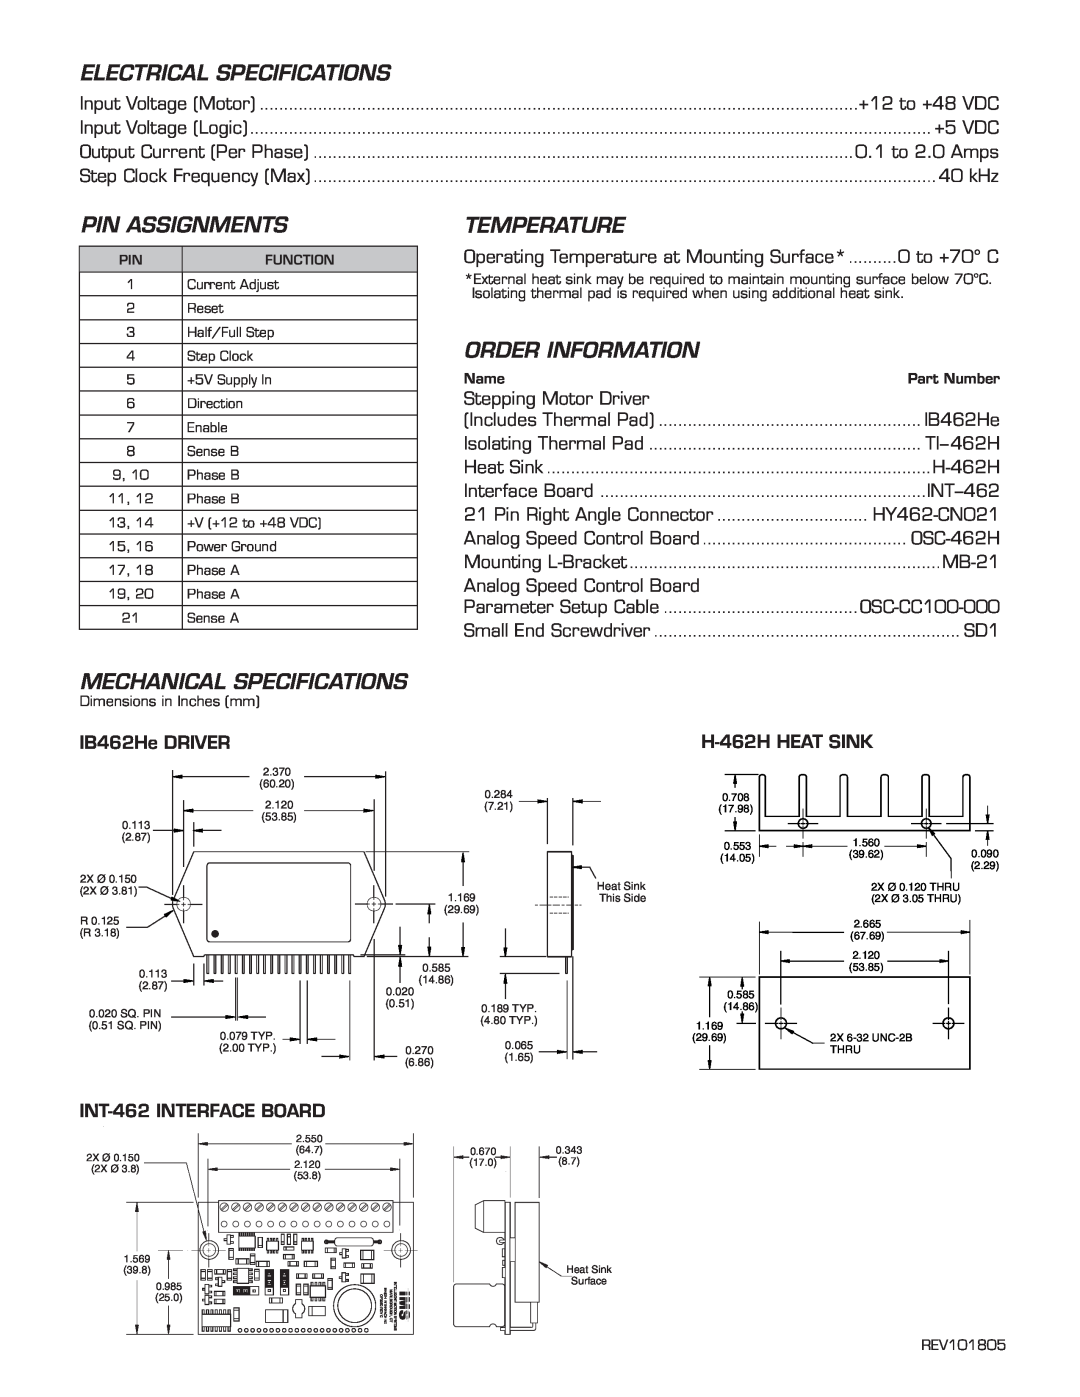 Intelligent Motion Systems IB462He warranty Electrical Specifications, Pin Assignments, Temperature, Order Information 